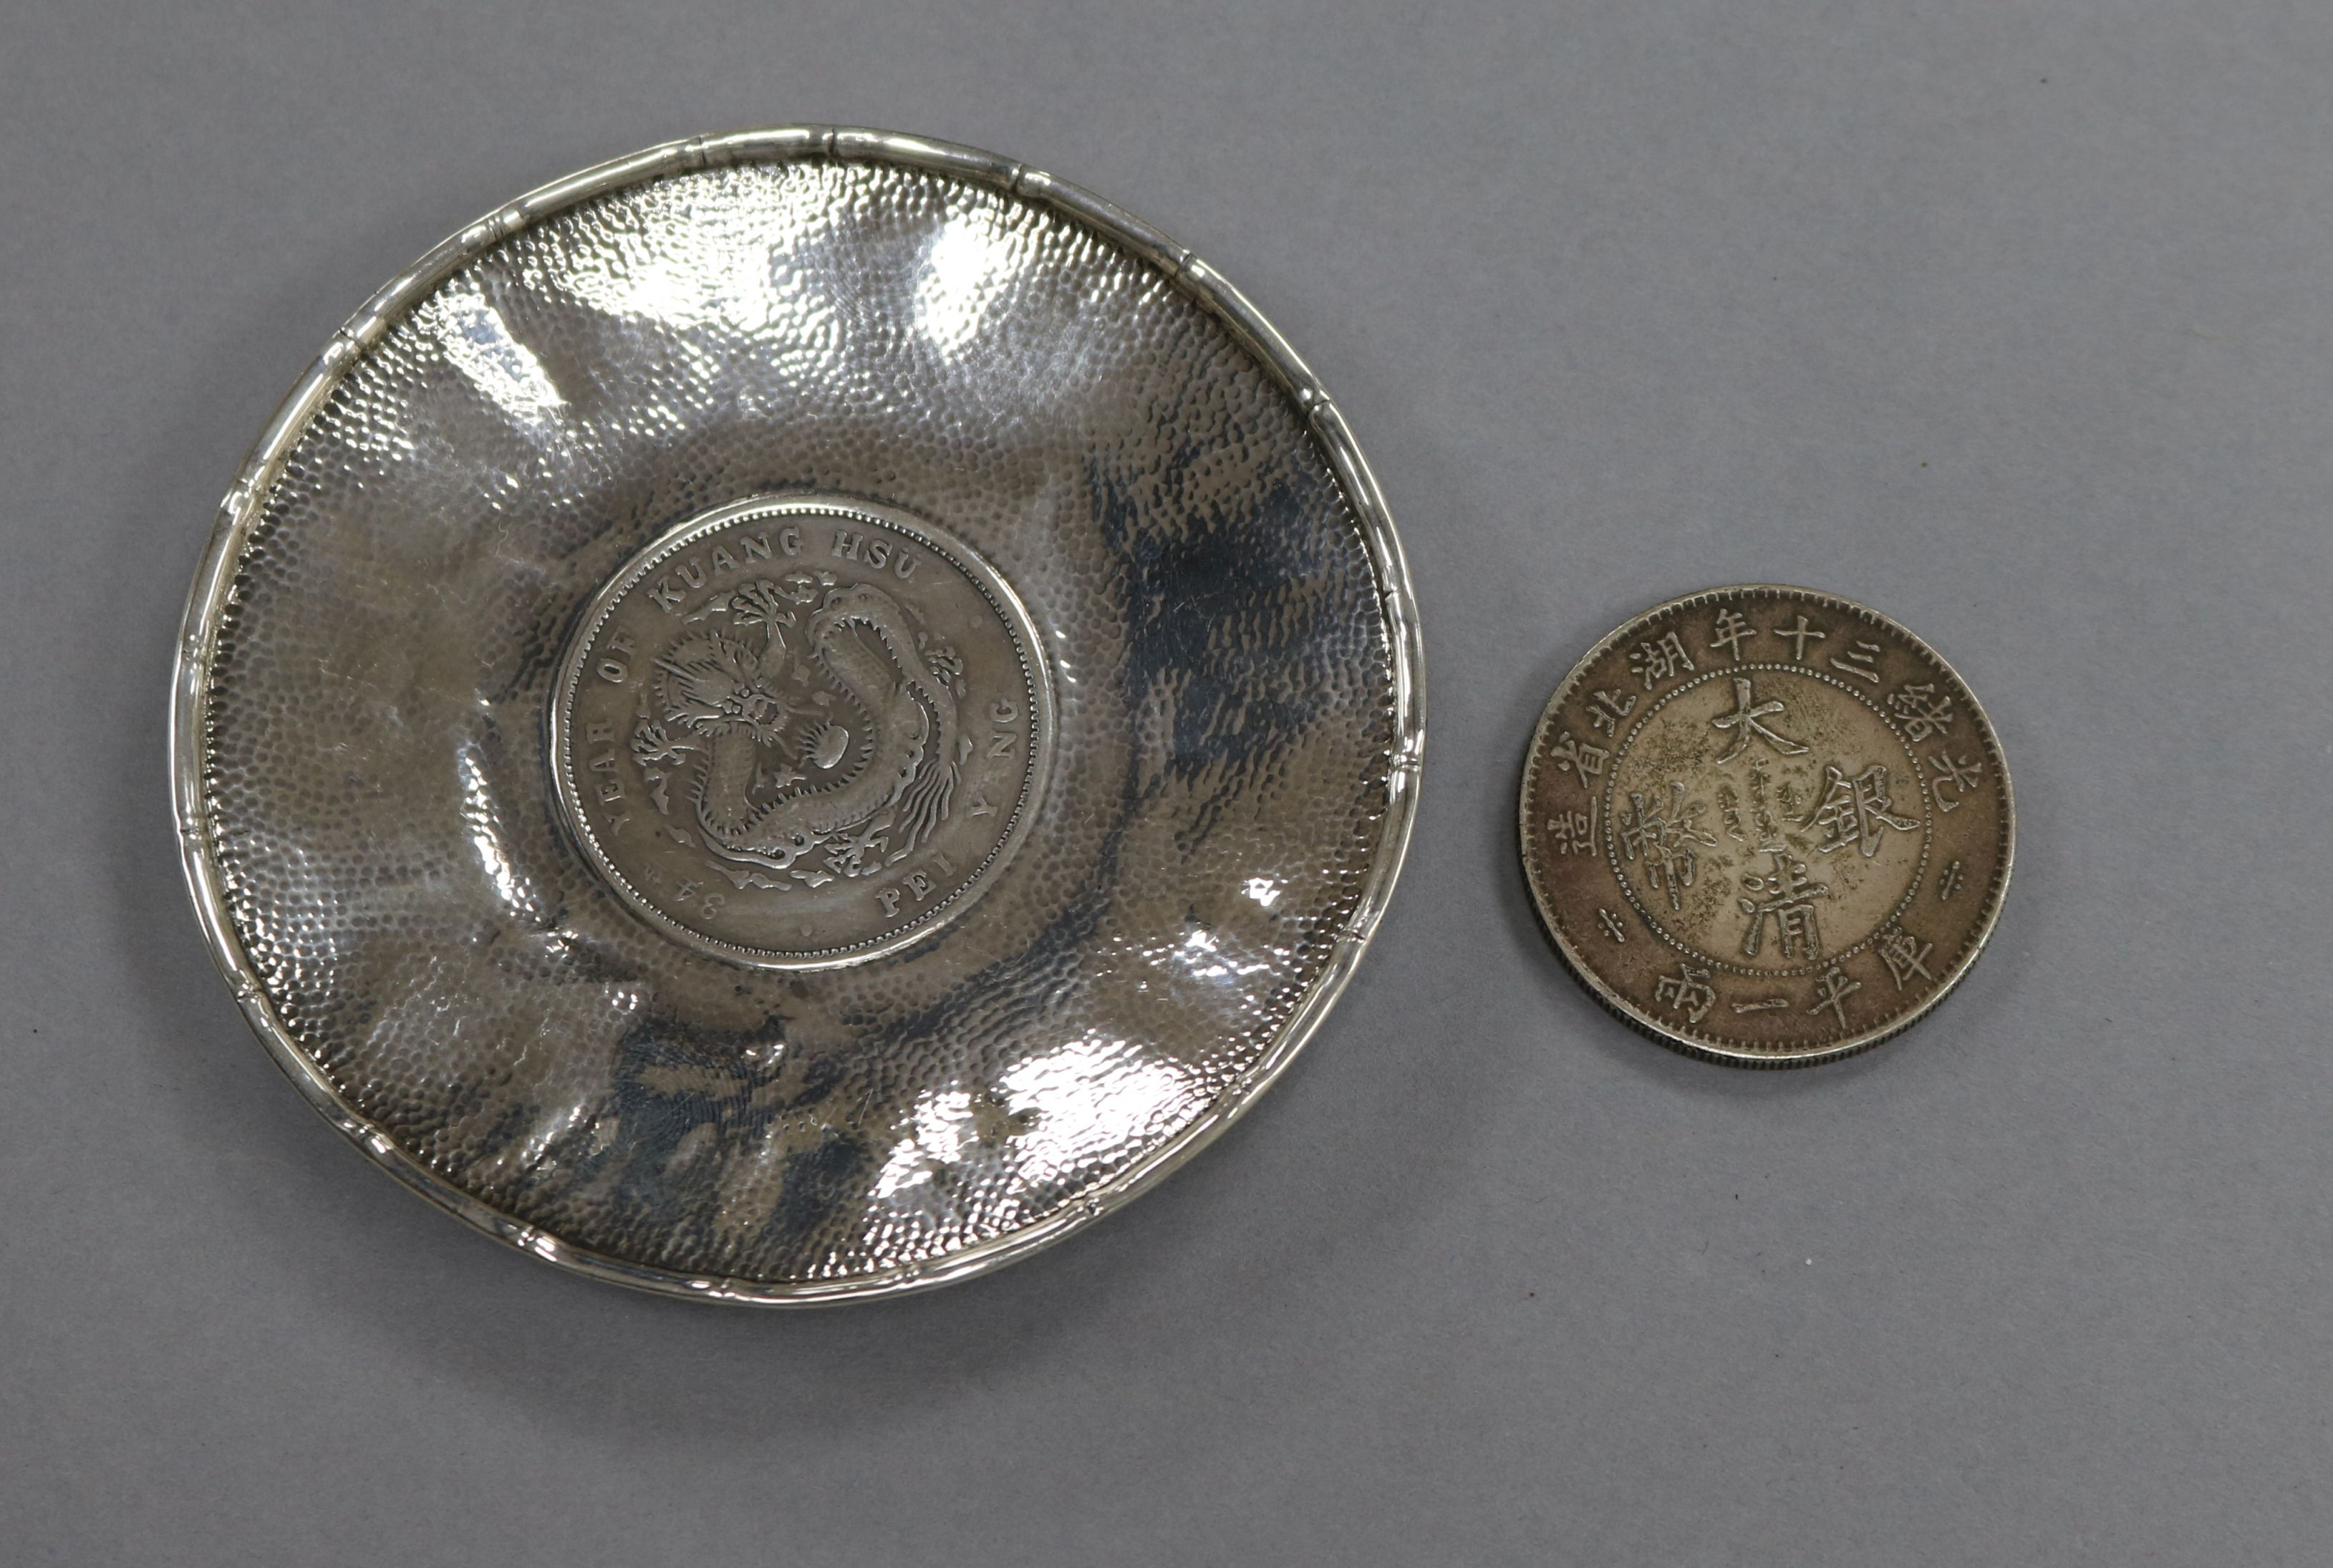 A coin inset tray and another coin